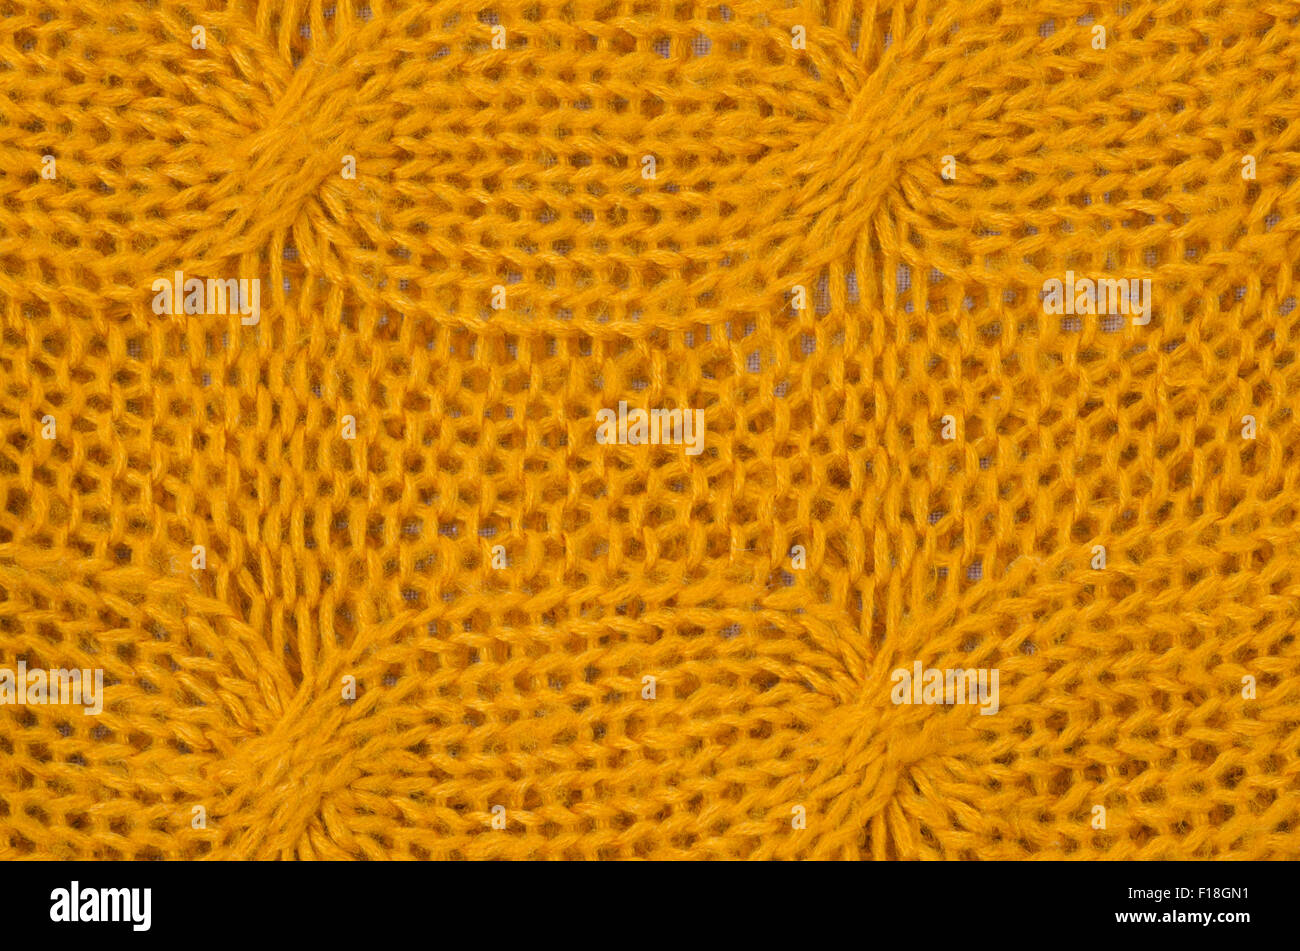 closeup to knitwear texture background Stock Photo